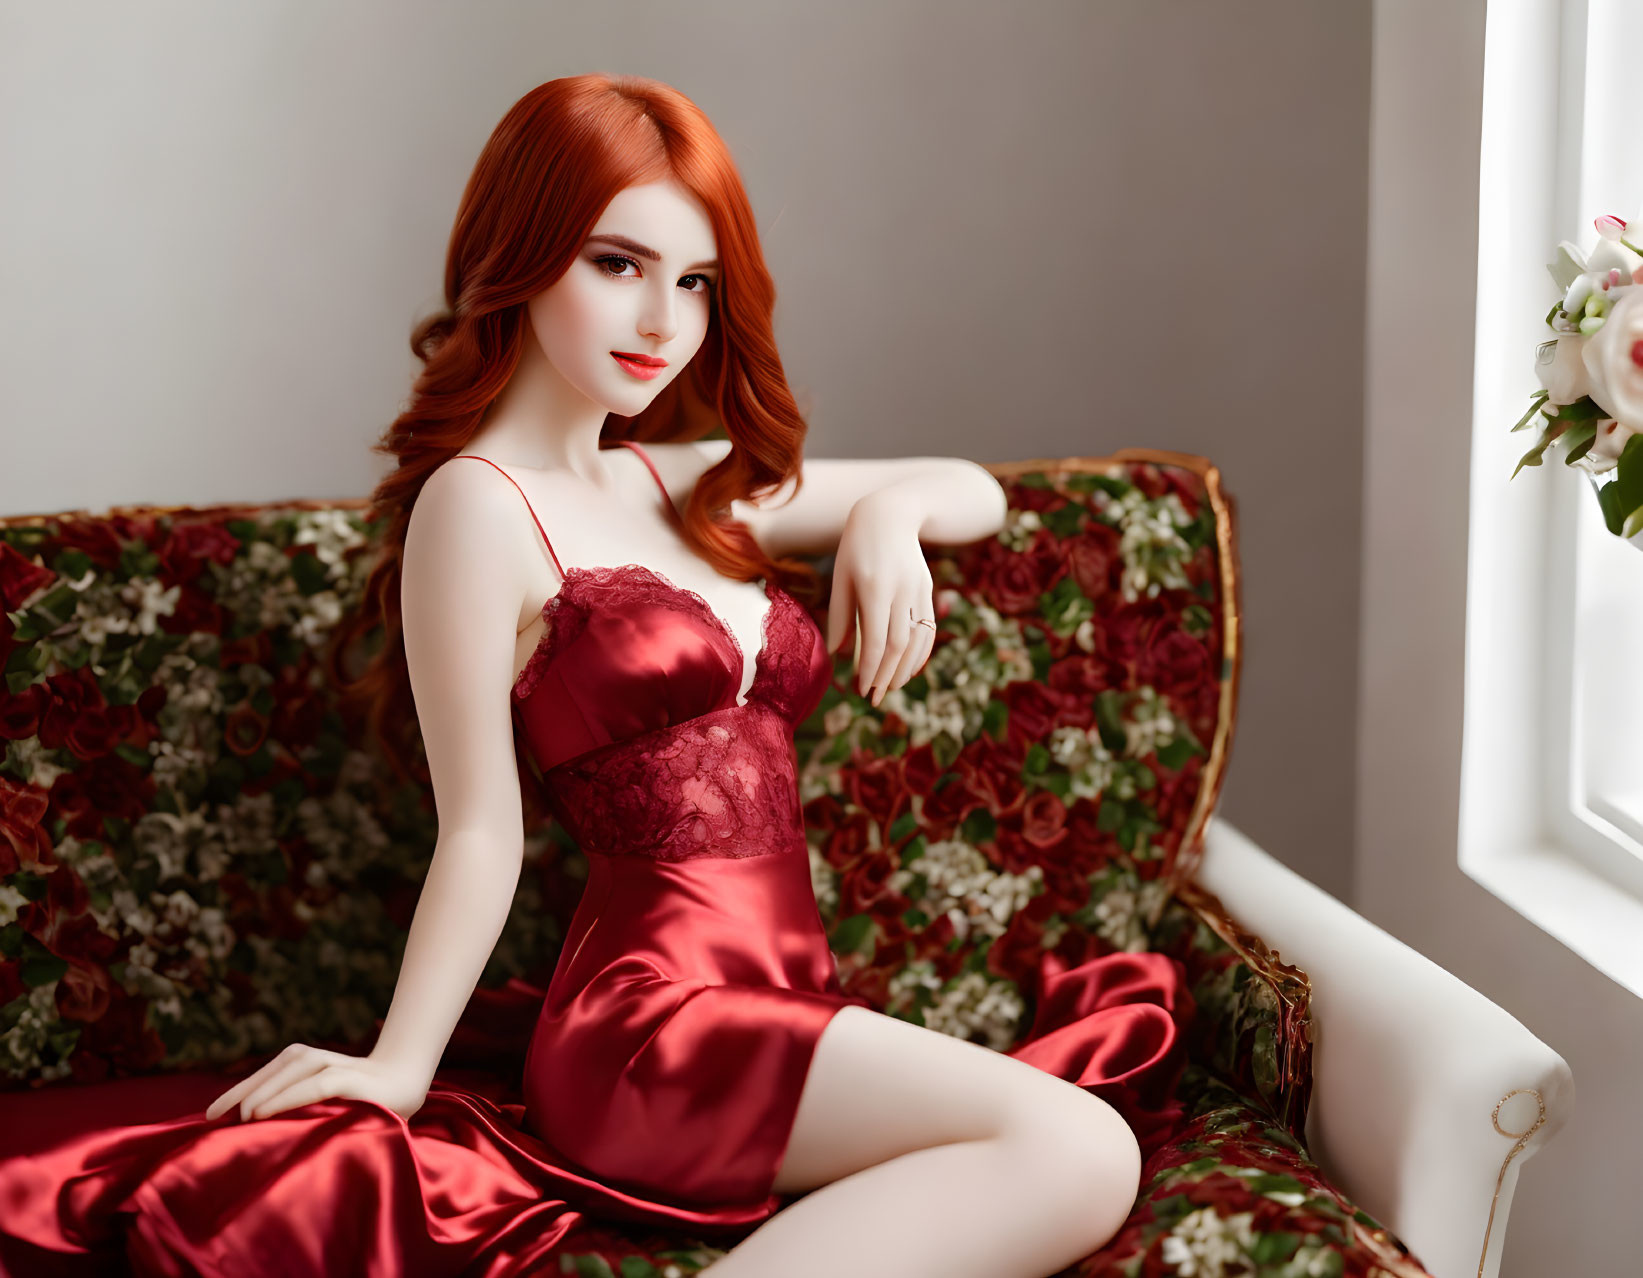 Red-haired animated character in silk dress on floral sofa by window